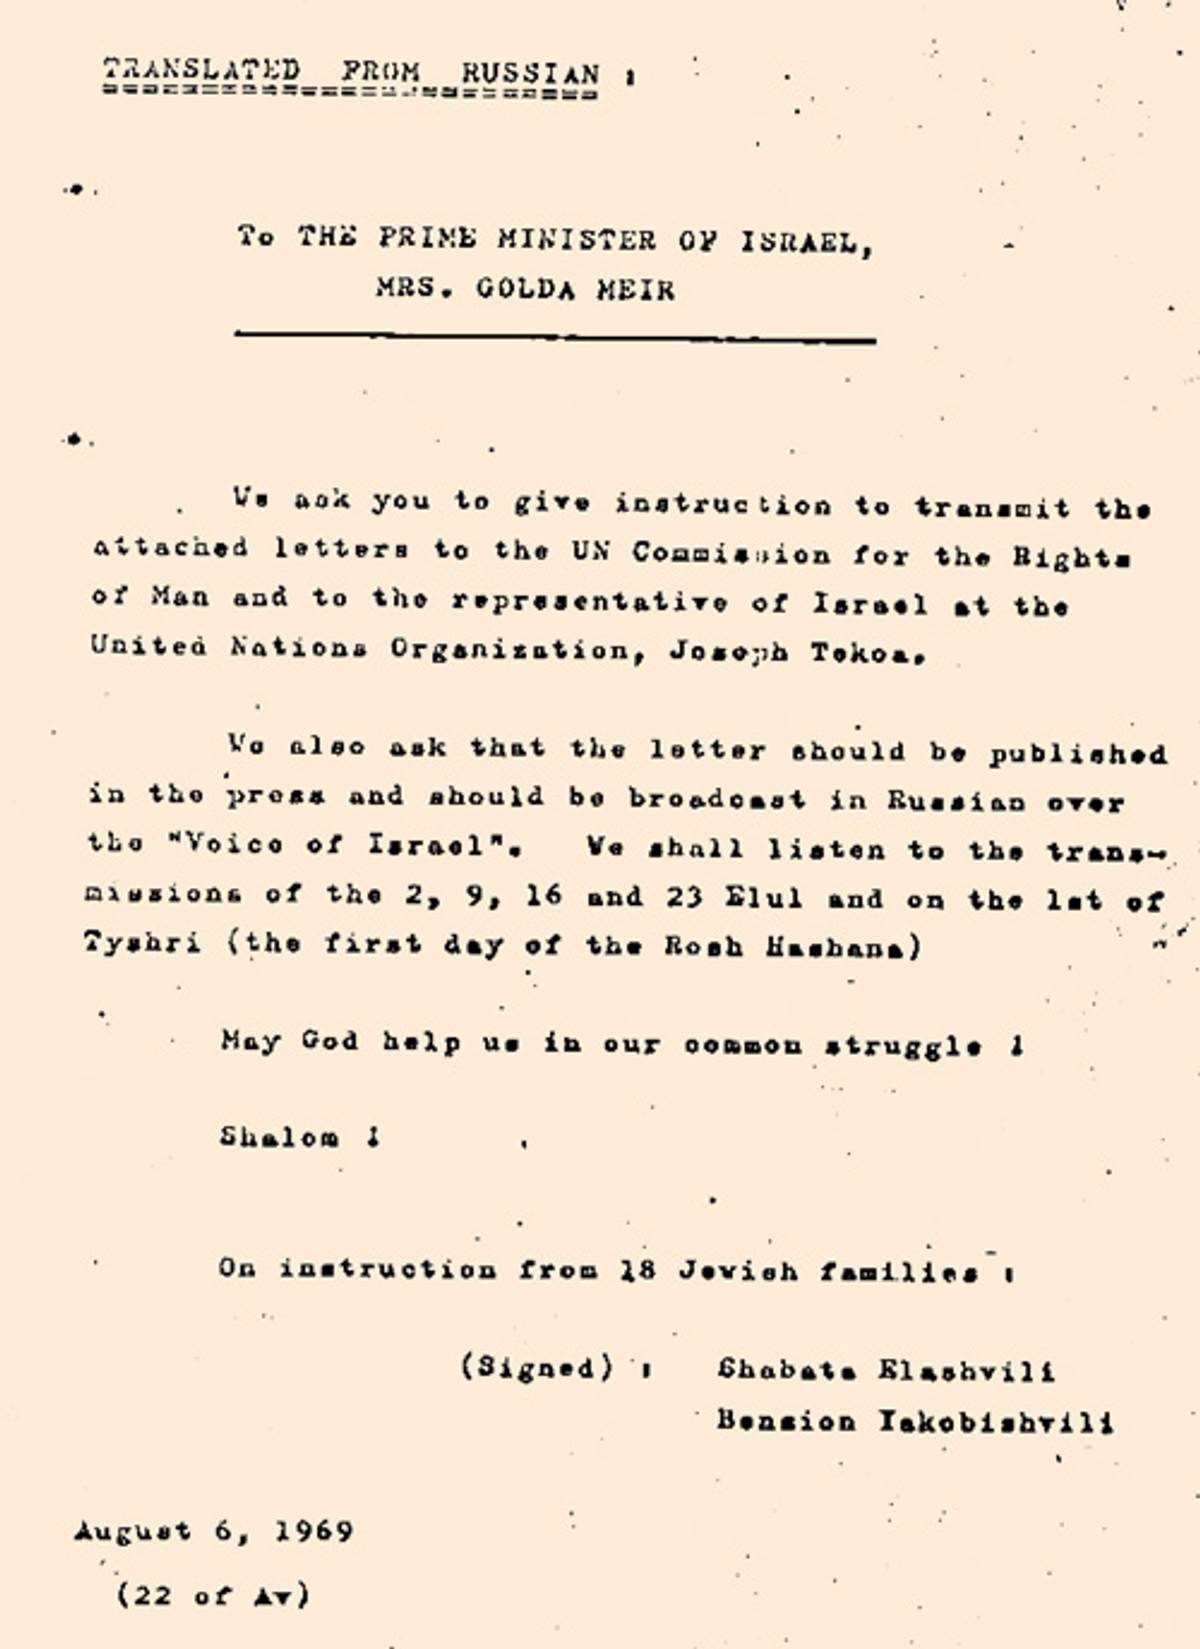 An excerpt of the letter, translated from Russian (Israel National Archive)